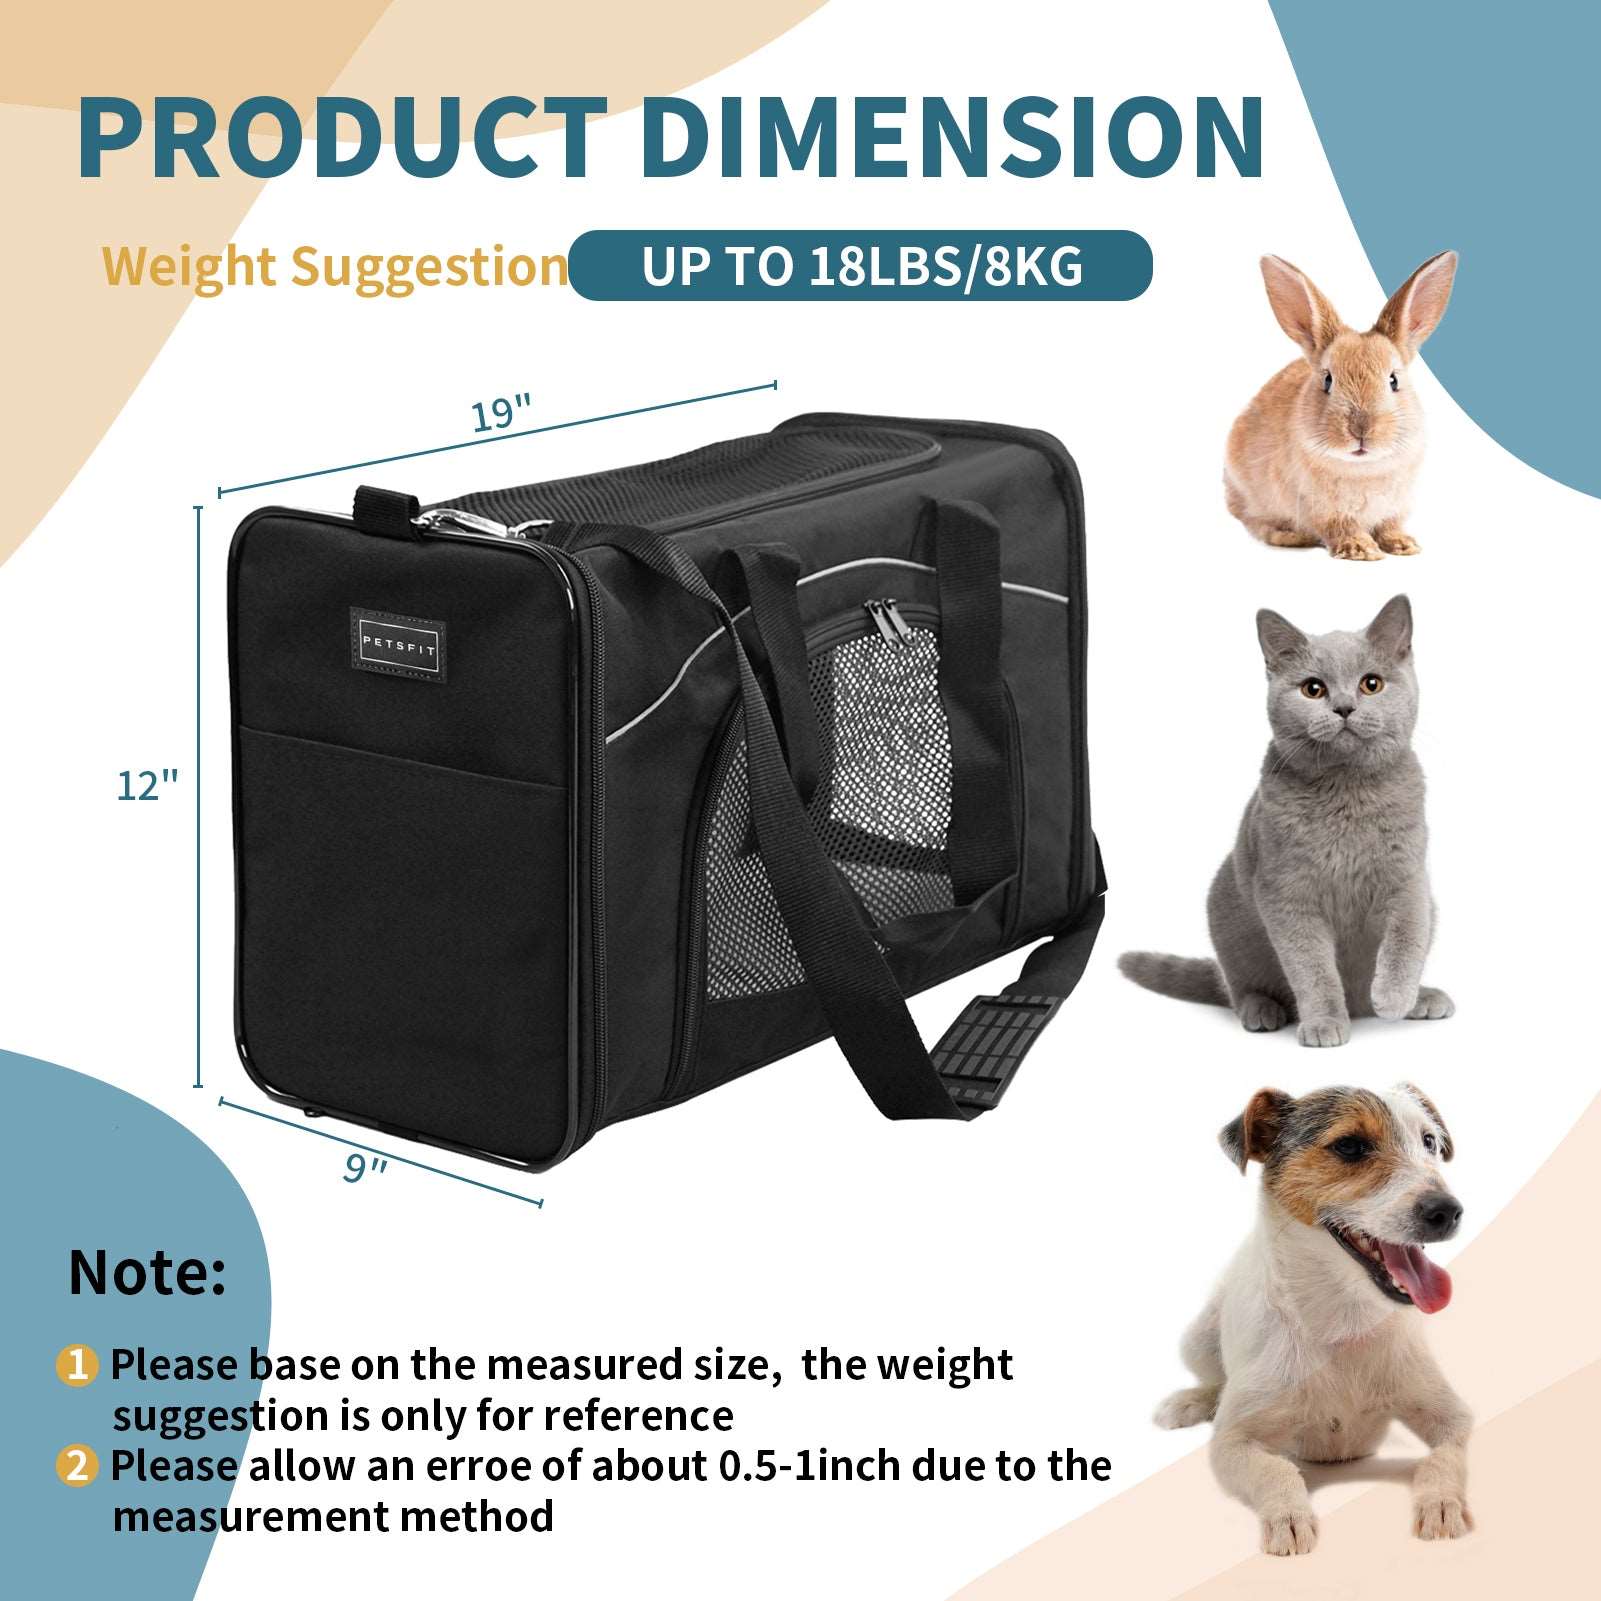 Petsfit-Pet-Carrier-Airline-Approved-02